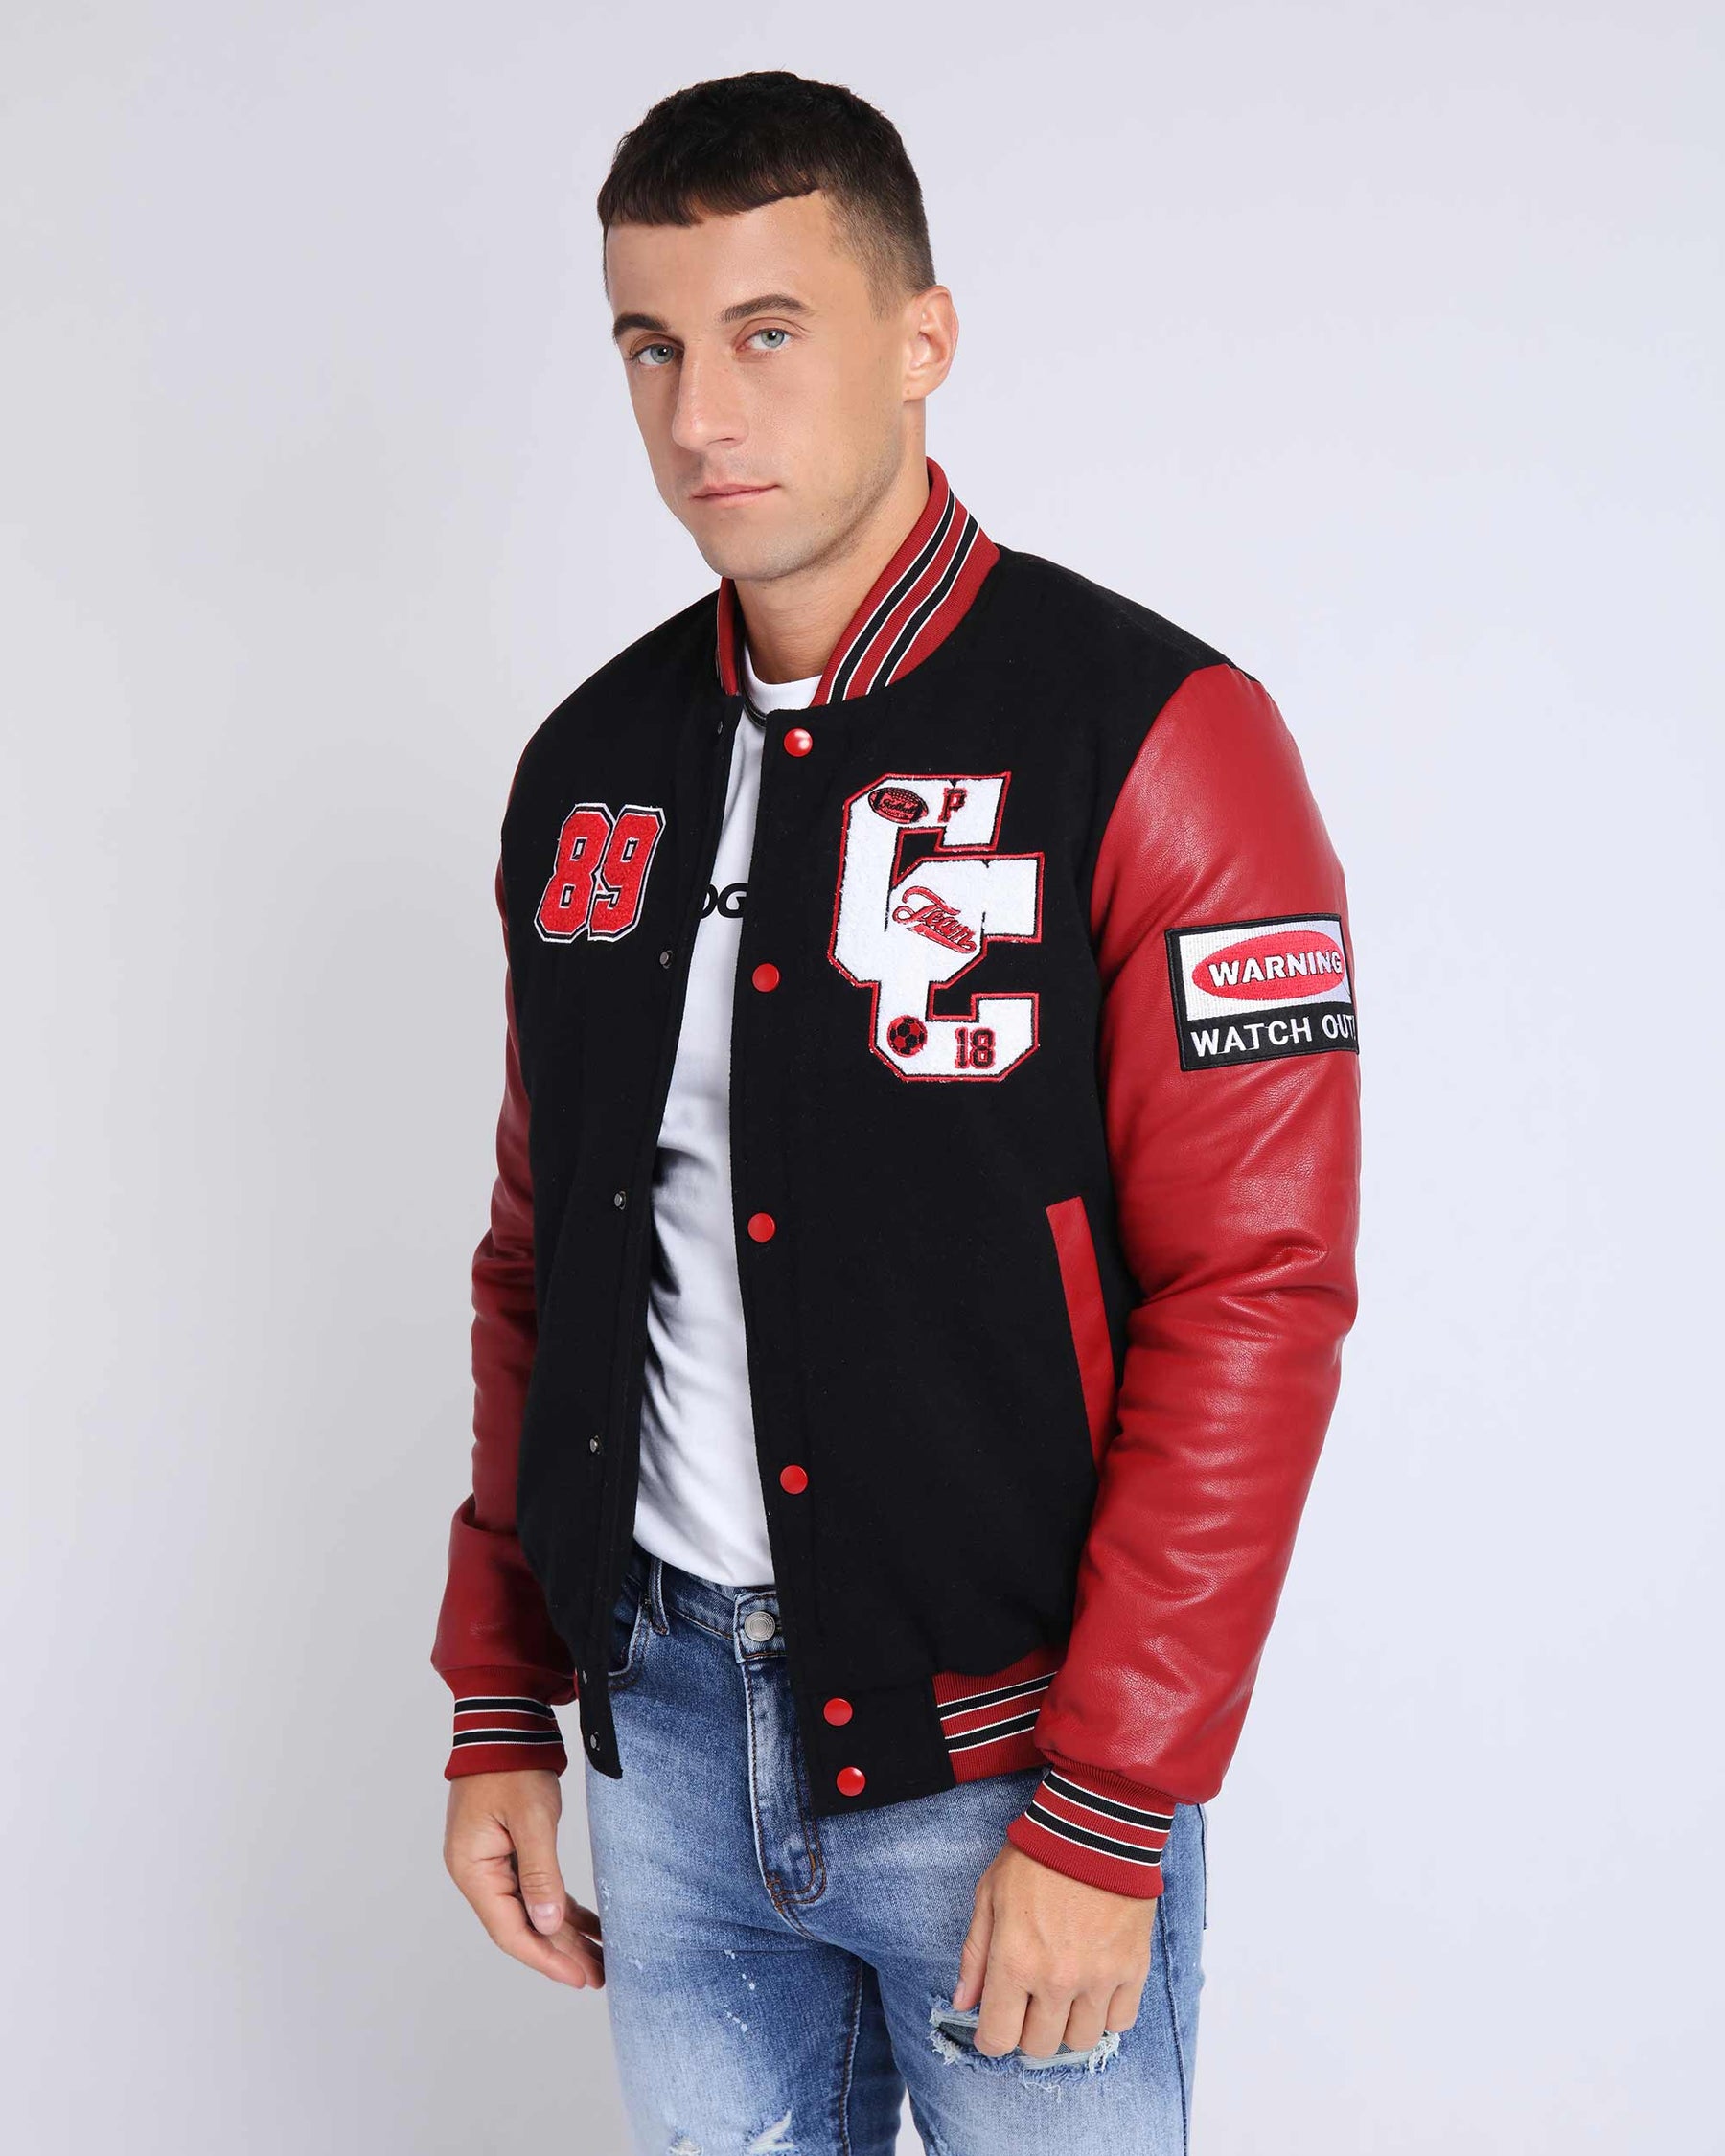 Logeqi Baseball Jacket-Chile Local Delivery